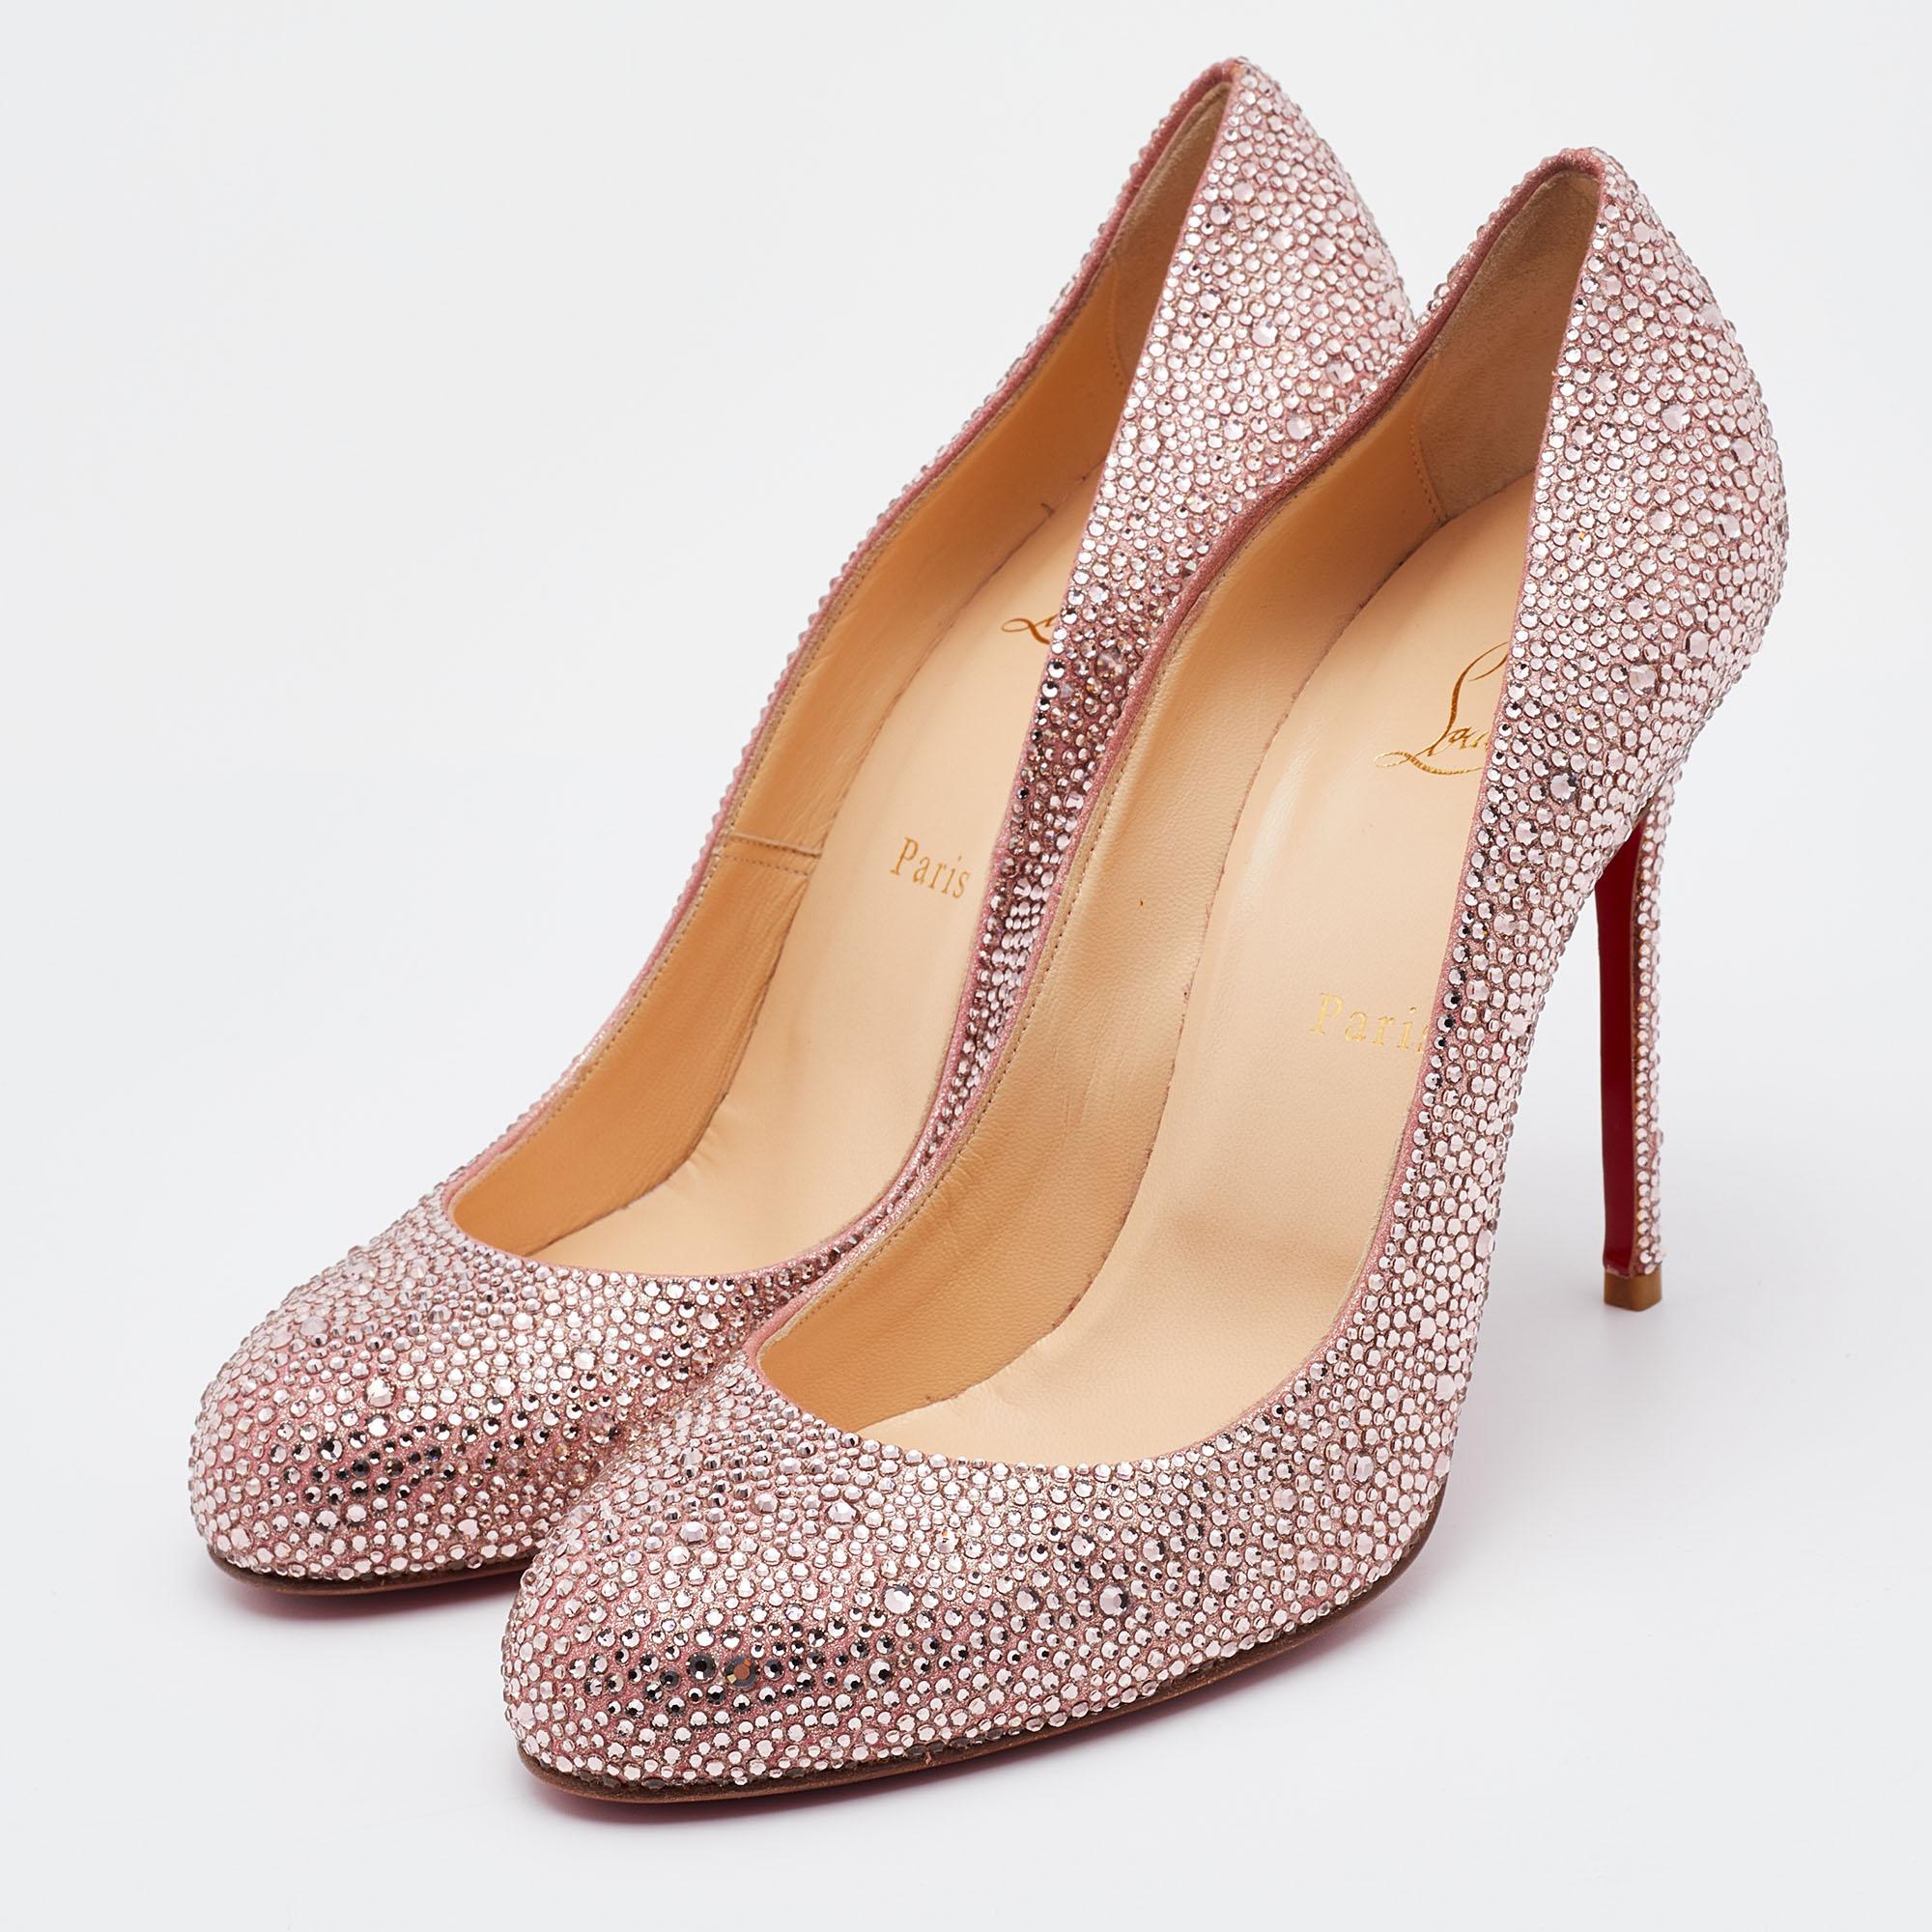 These pumps are designed to offer elegance and sophistication to your attire. Crafted from quality materials, they are raised on high heels and completed with a classy silhouette.

Includes
Original Box, Original Dustbag